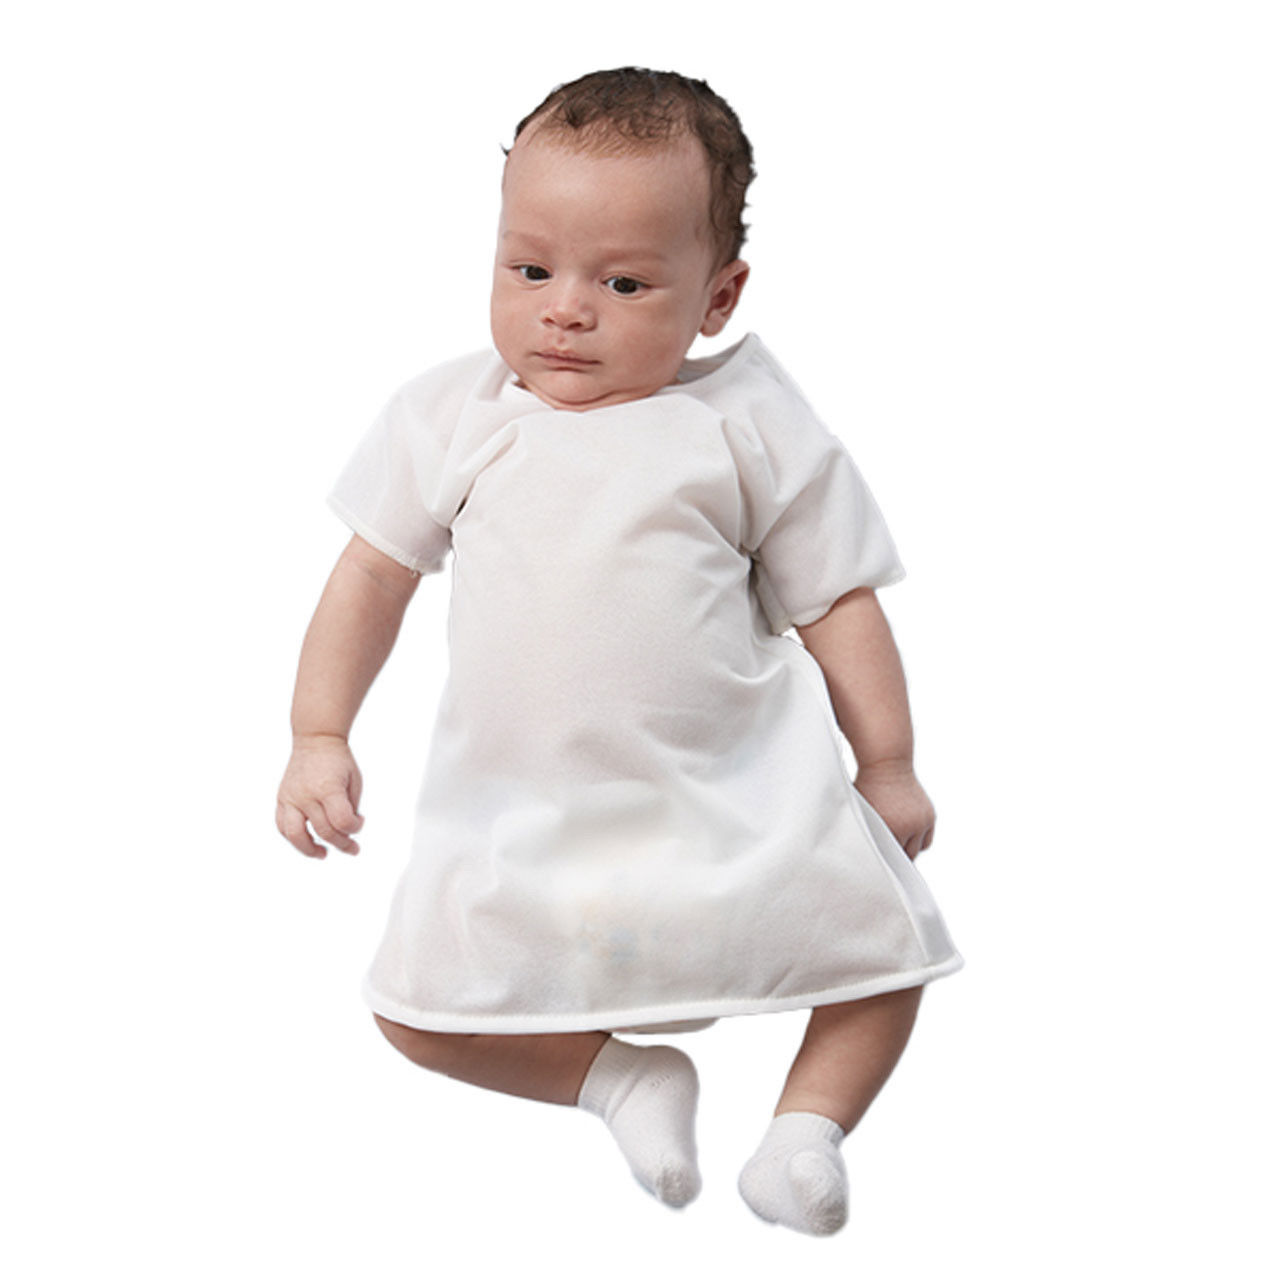 What type of fabric is used in the baby hospital gown, specifically the Pediatric Hospital Gowns, White - In Bulk?